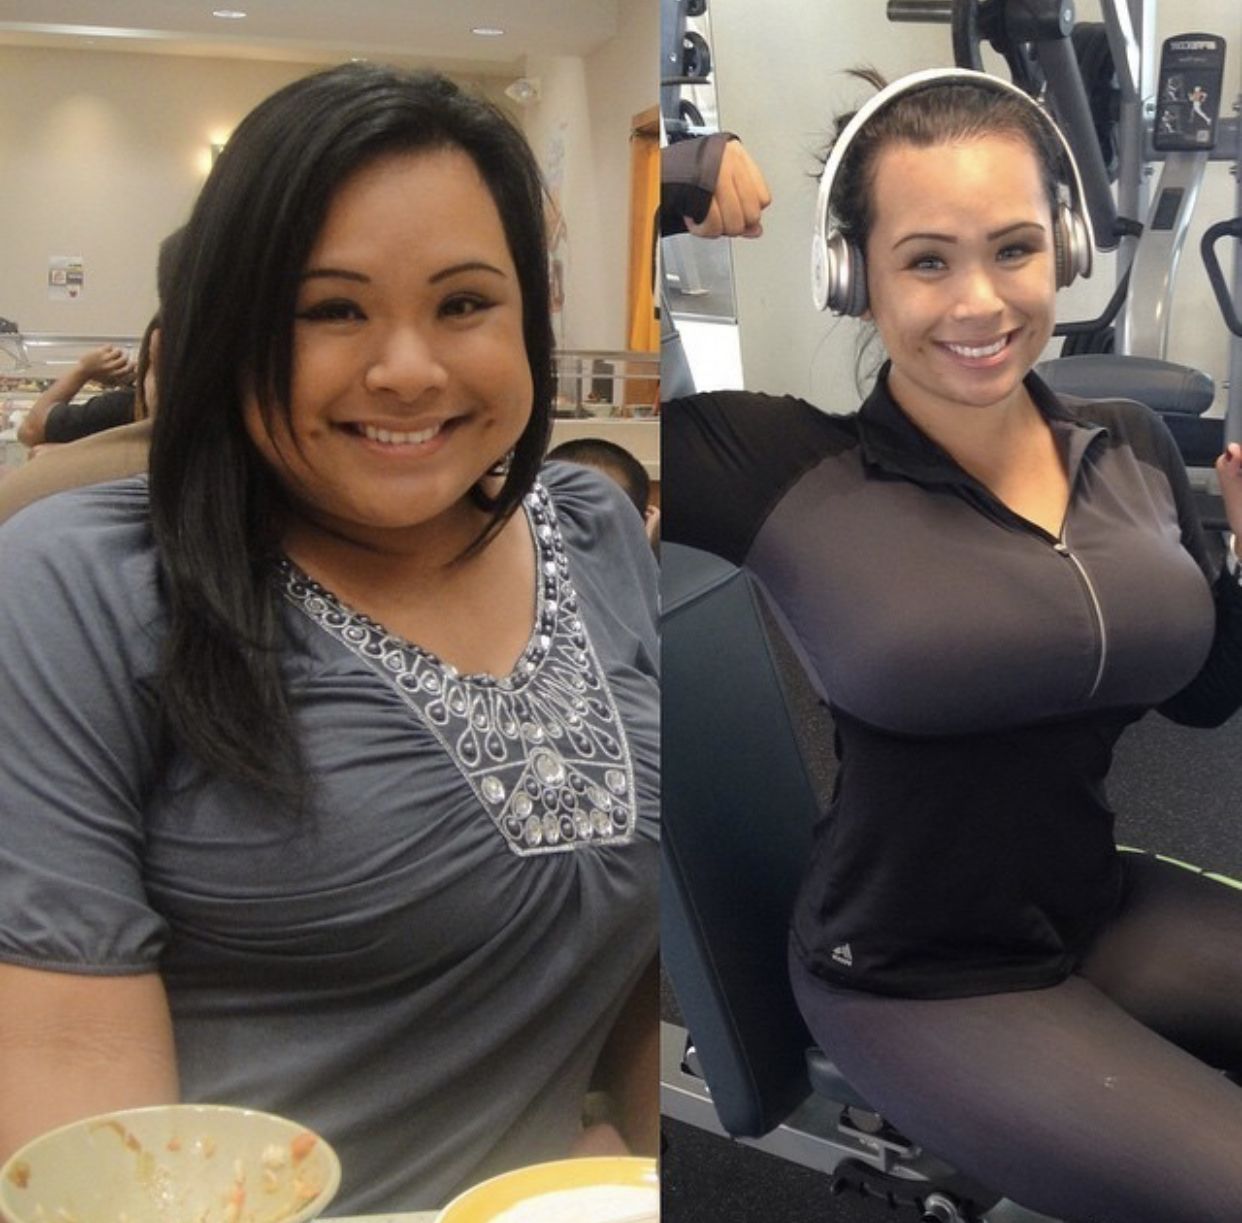 Check out @simonelovee вќ¤пёЏ -   20 fitness mujer antes y despues
 ideas